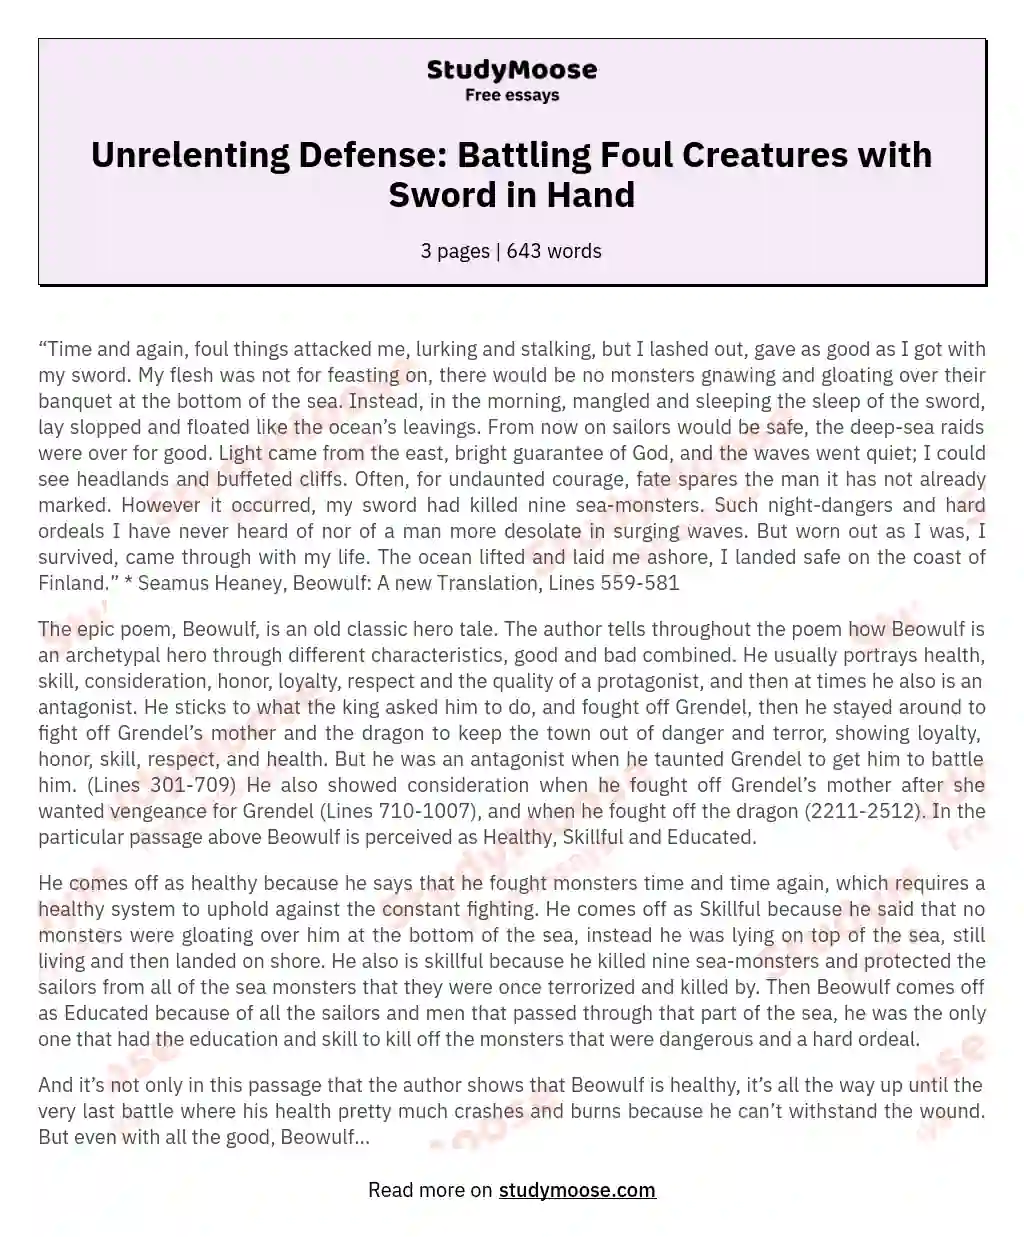 Unrelenting Defense: Battling Foul Creatures with Sword in Hand essay